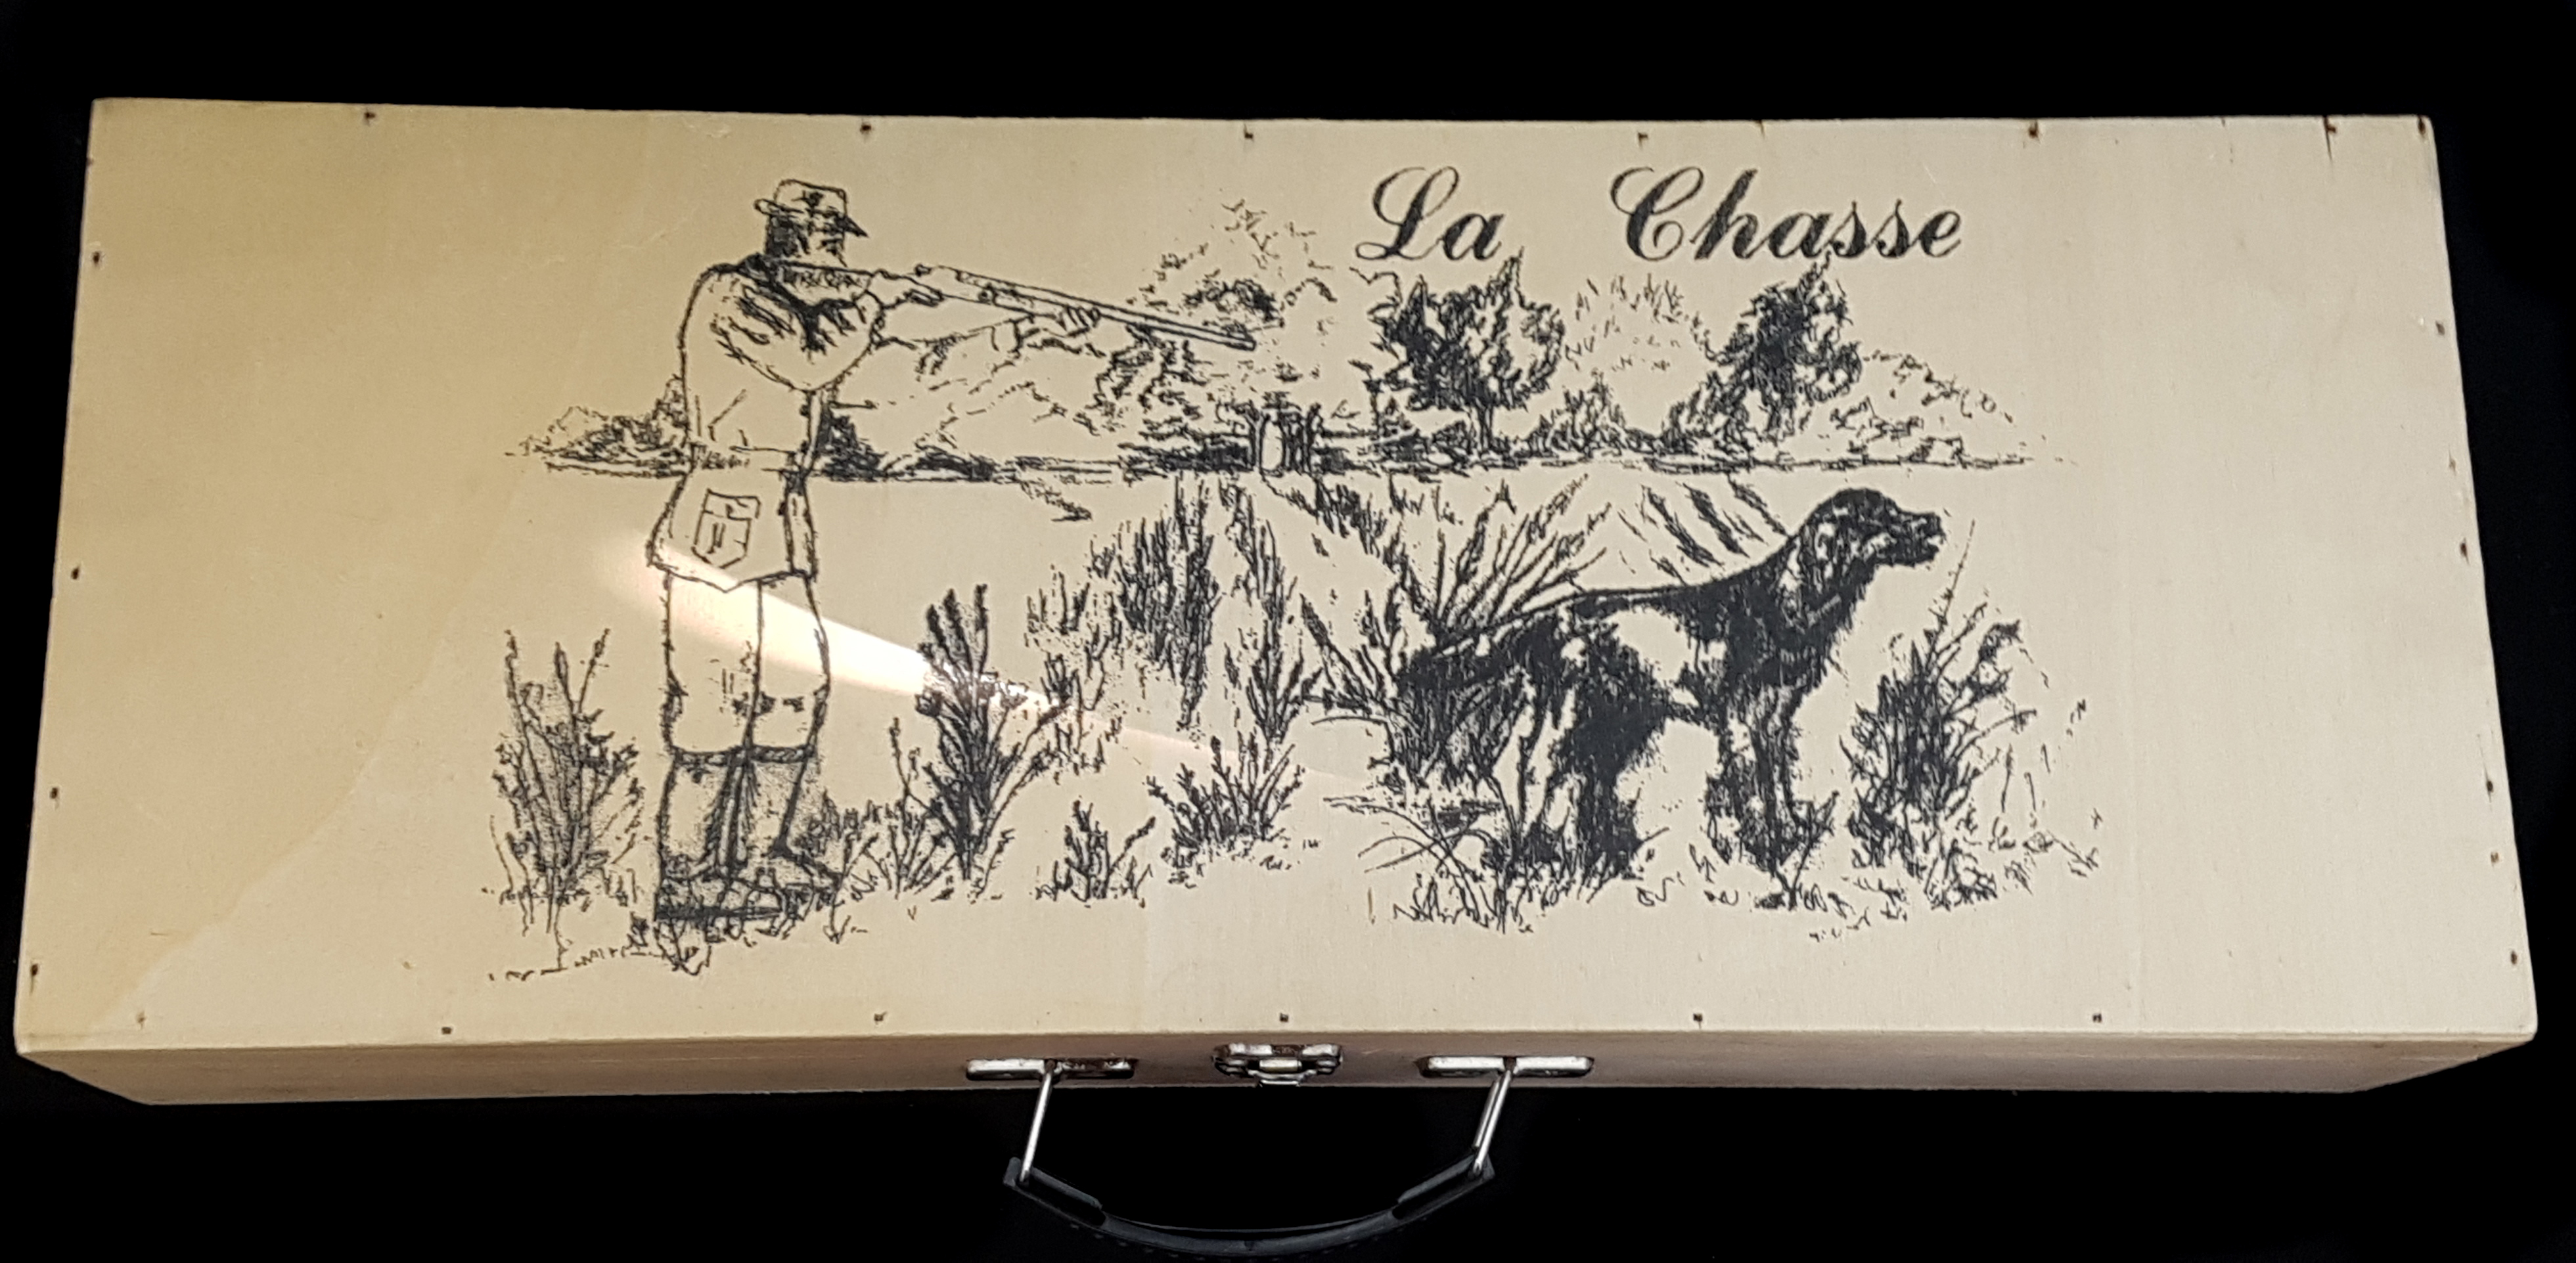 Wine related collectable's - La Chasse shotgun form colourless glass wine bottle, paper labels for - Image 2 of 2